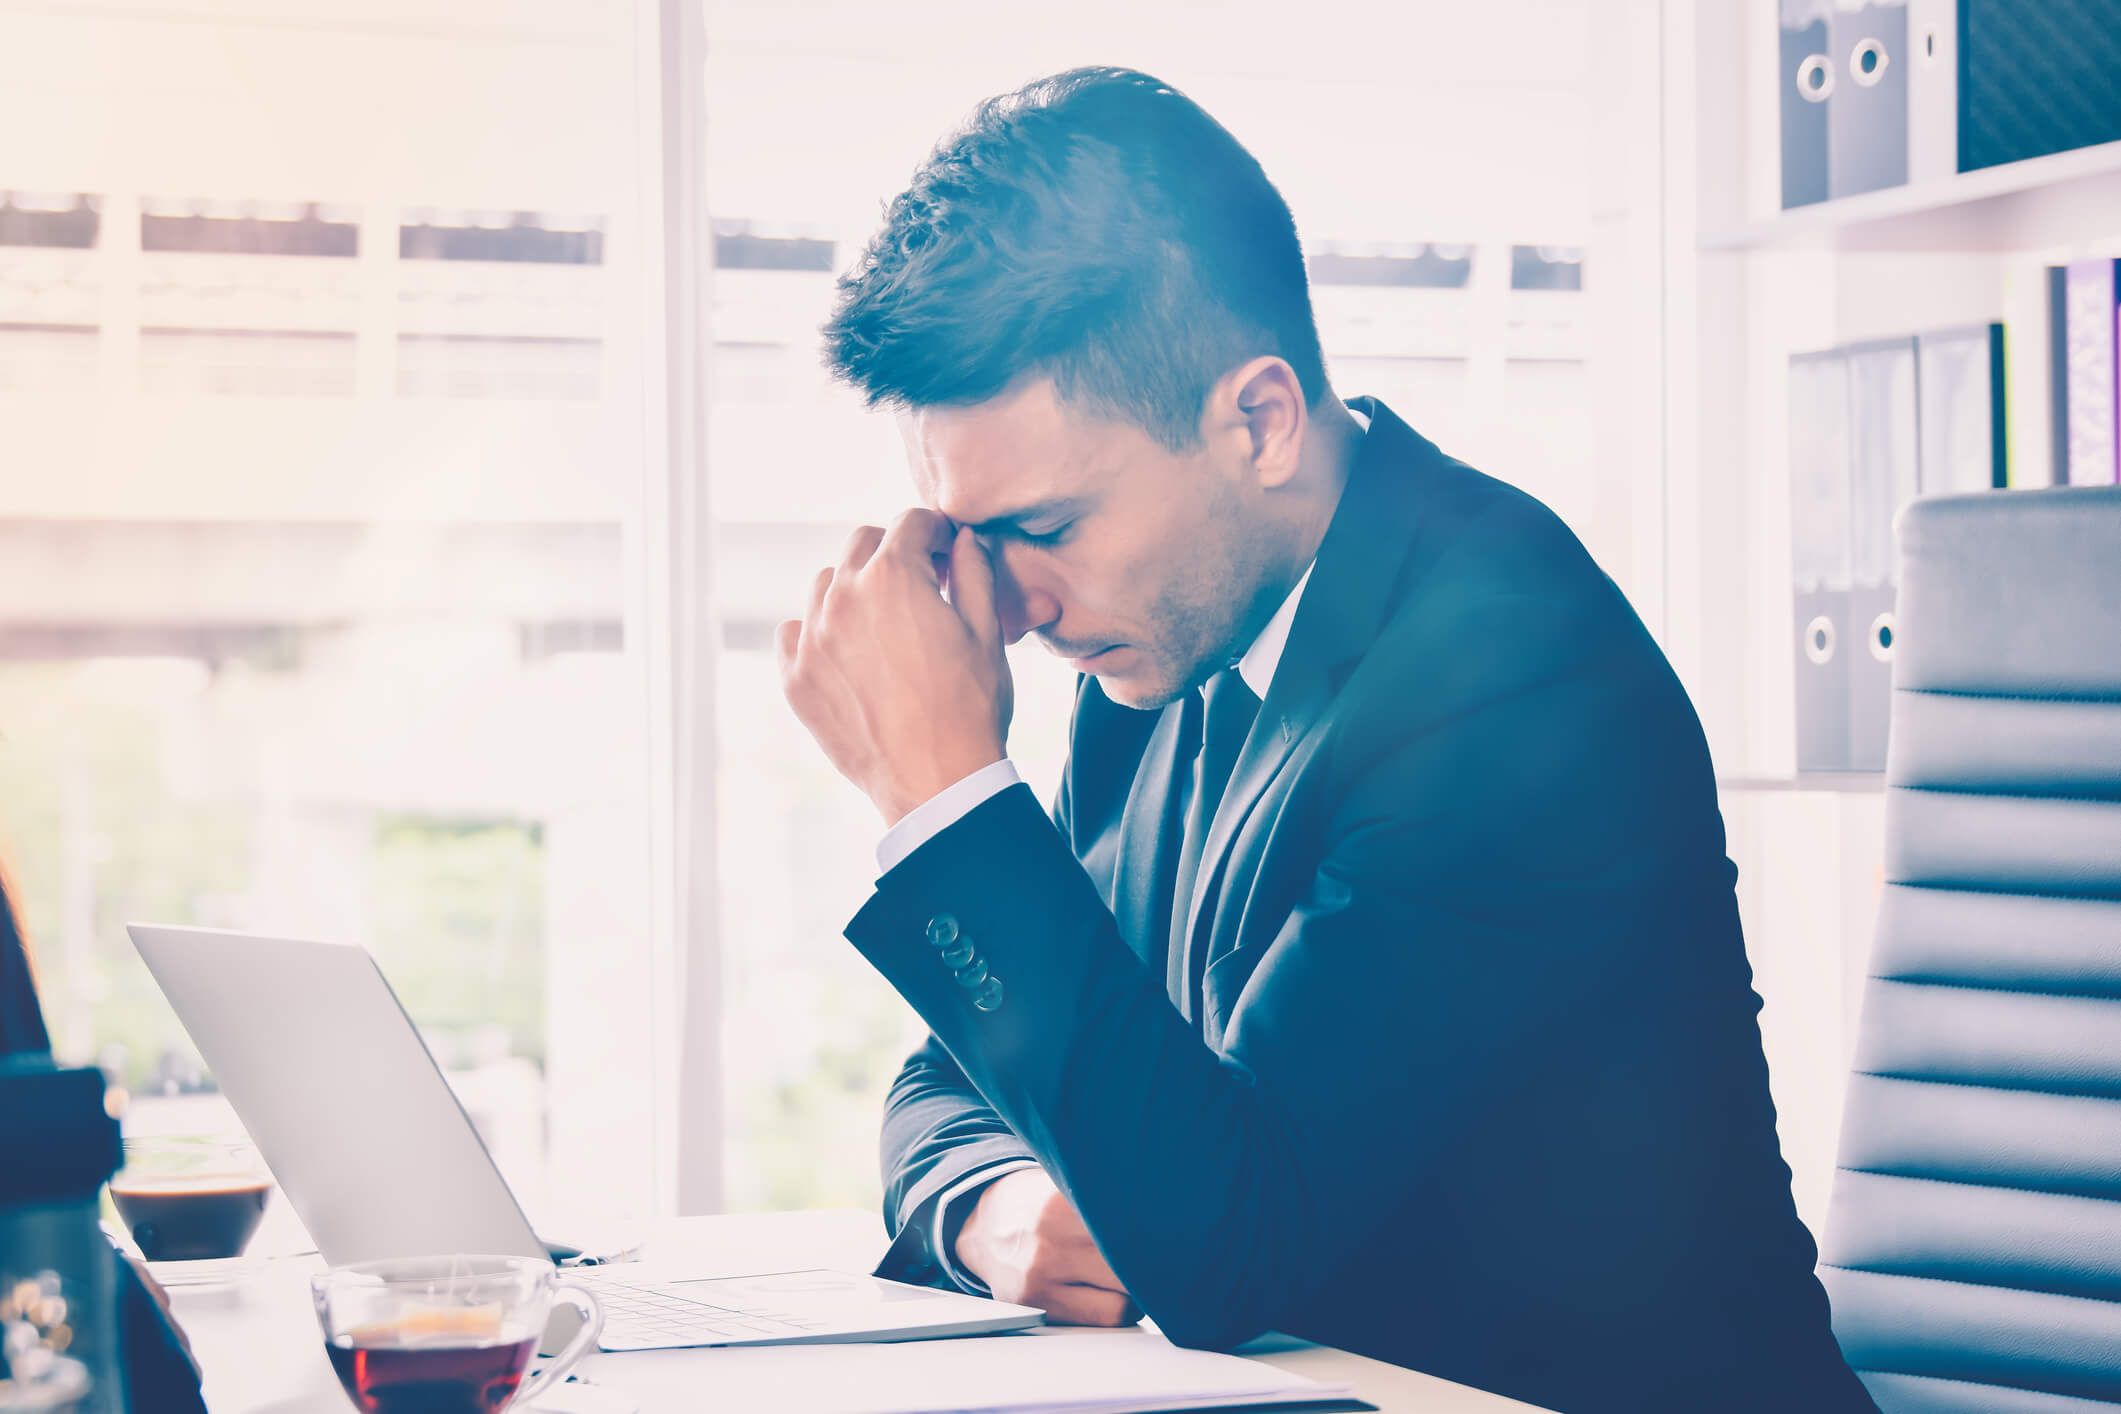 Learn how to avoid sales burnout at year-end